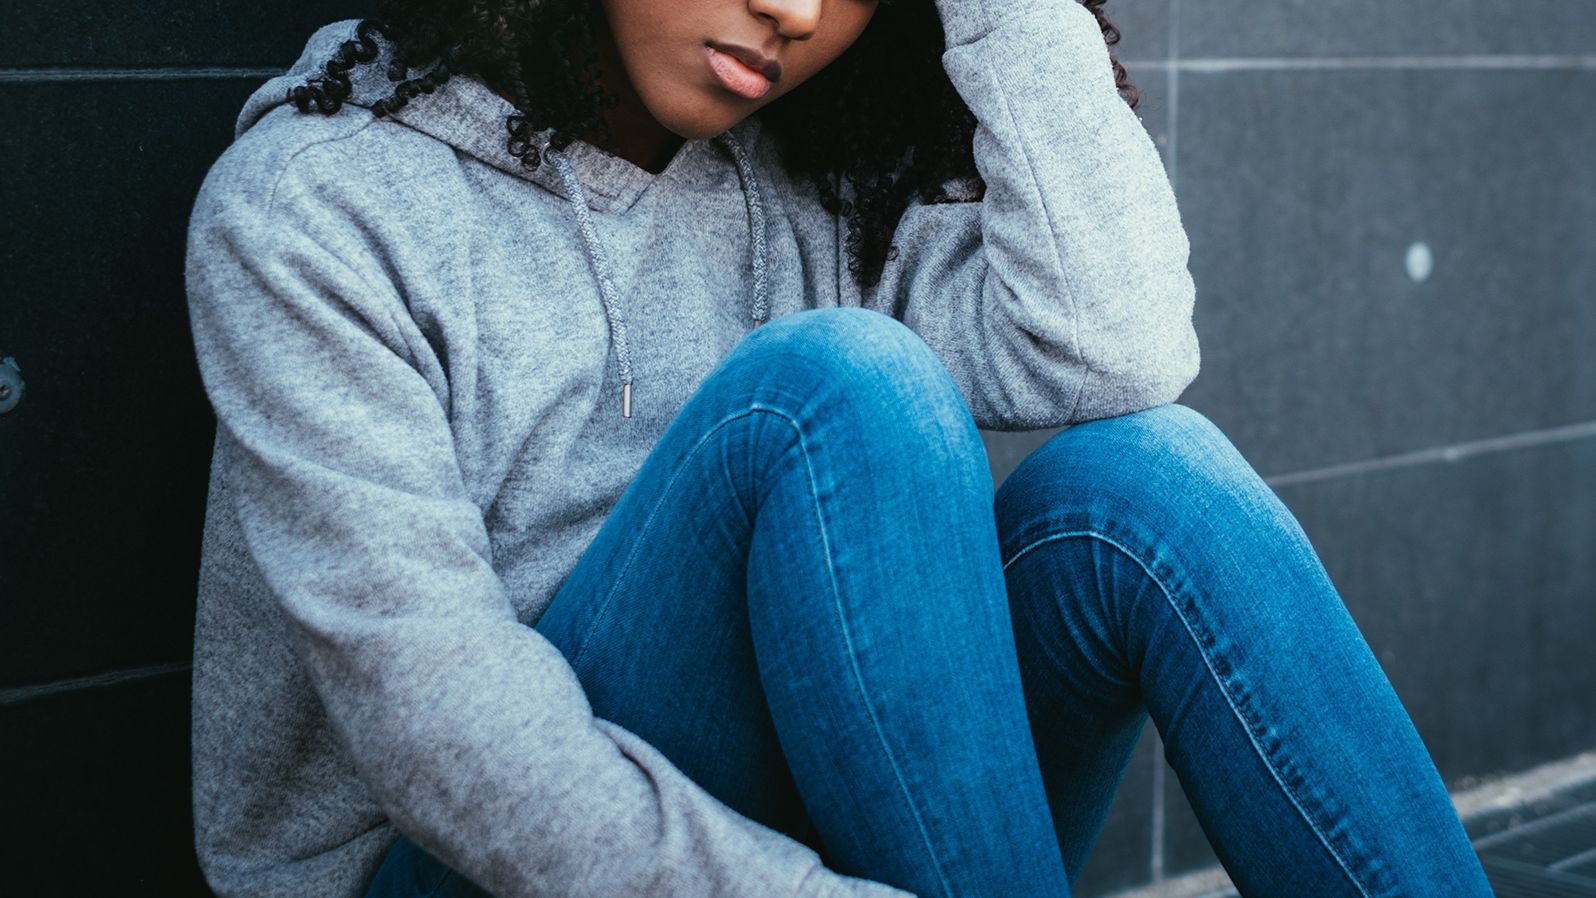 New research has discovered details about the state of adolescent mental health in the United States during the pandemic.